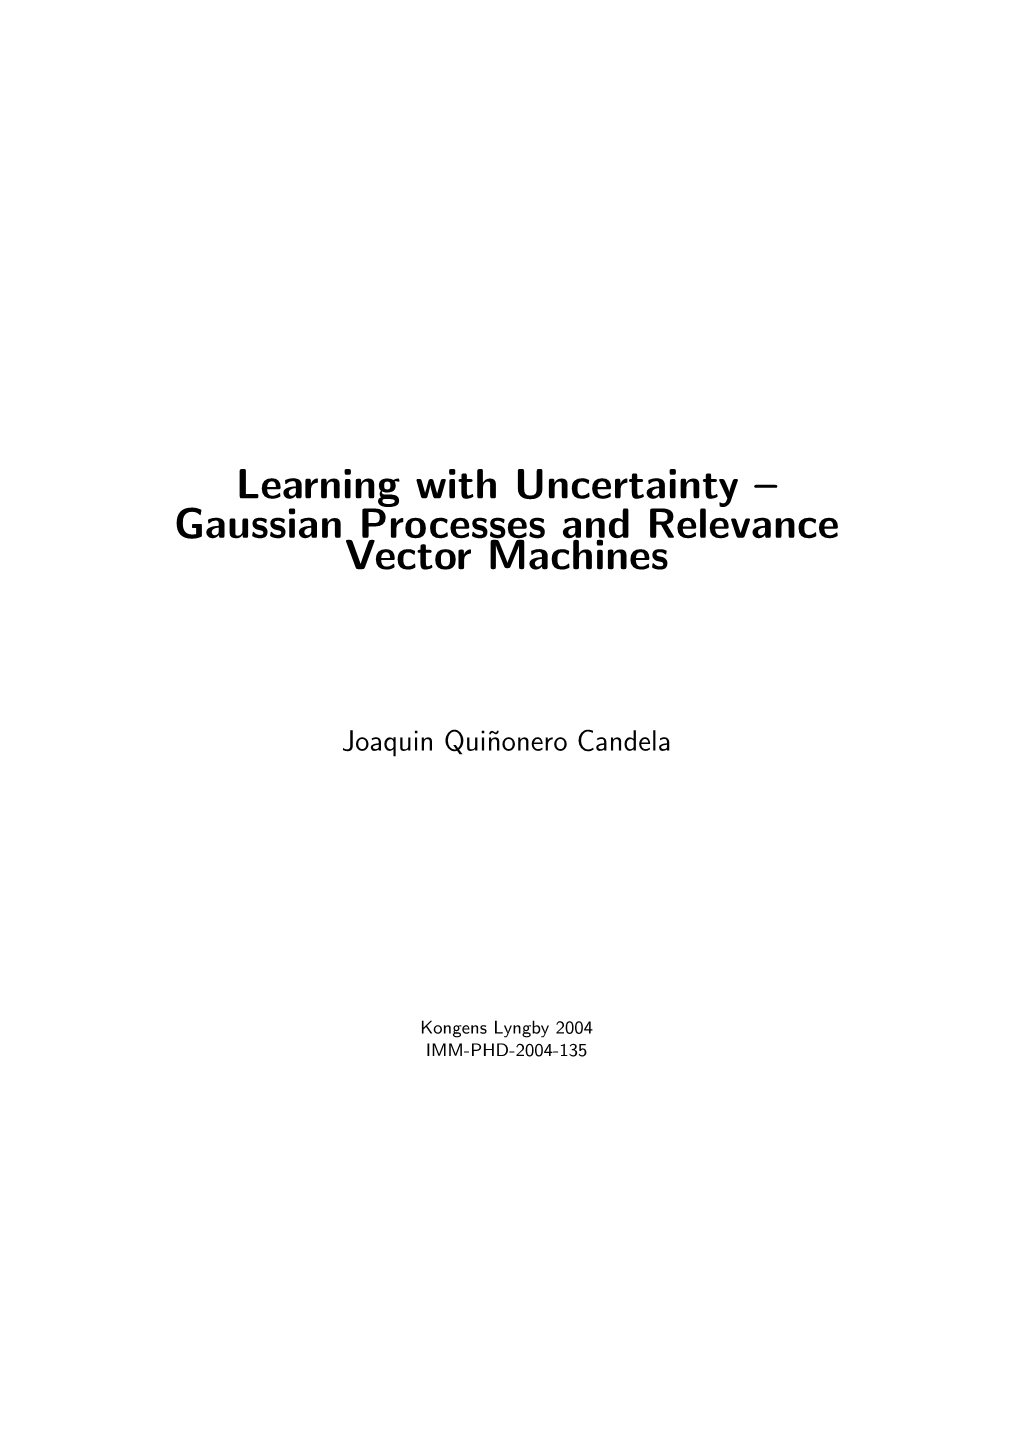 Gaussian Processes and Relevance Vector Machines